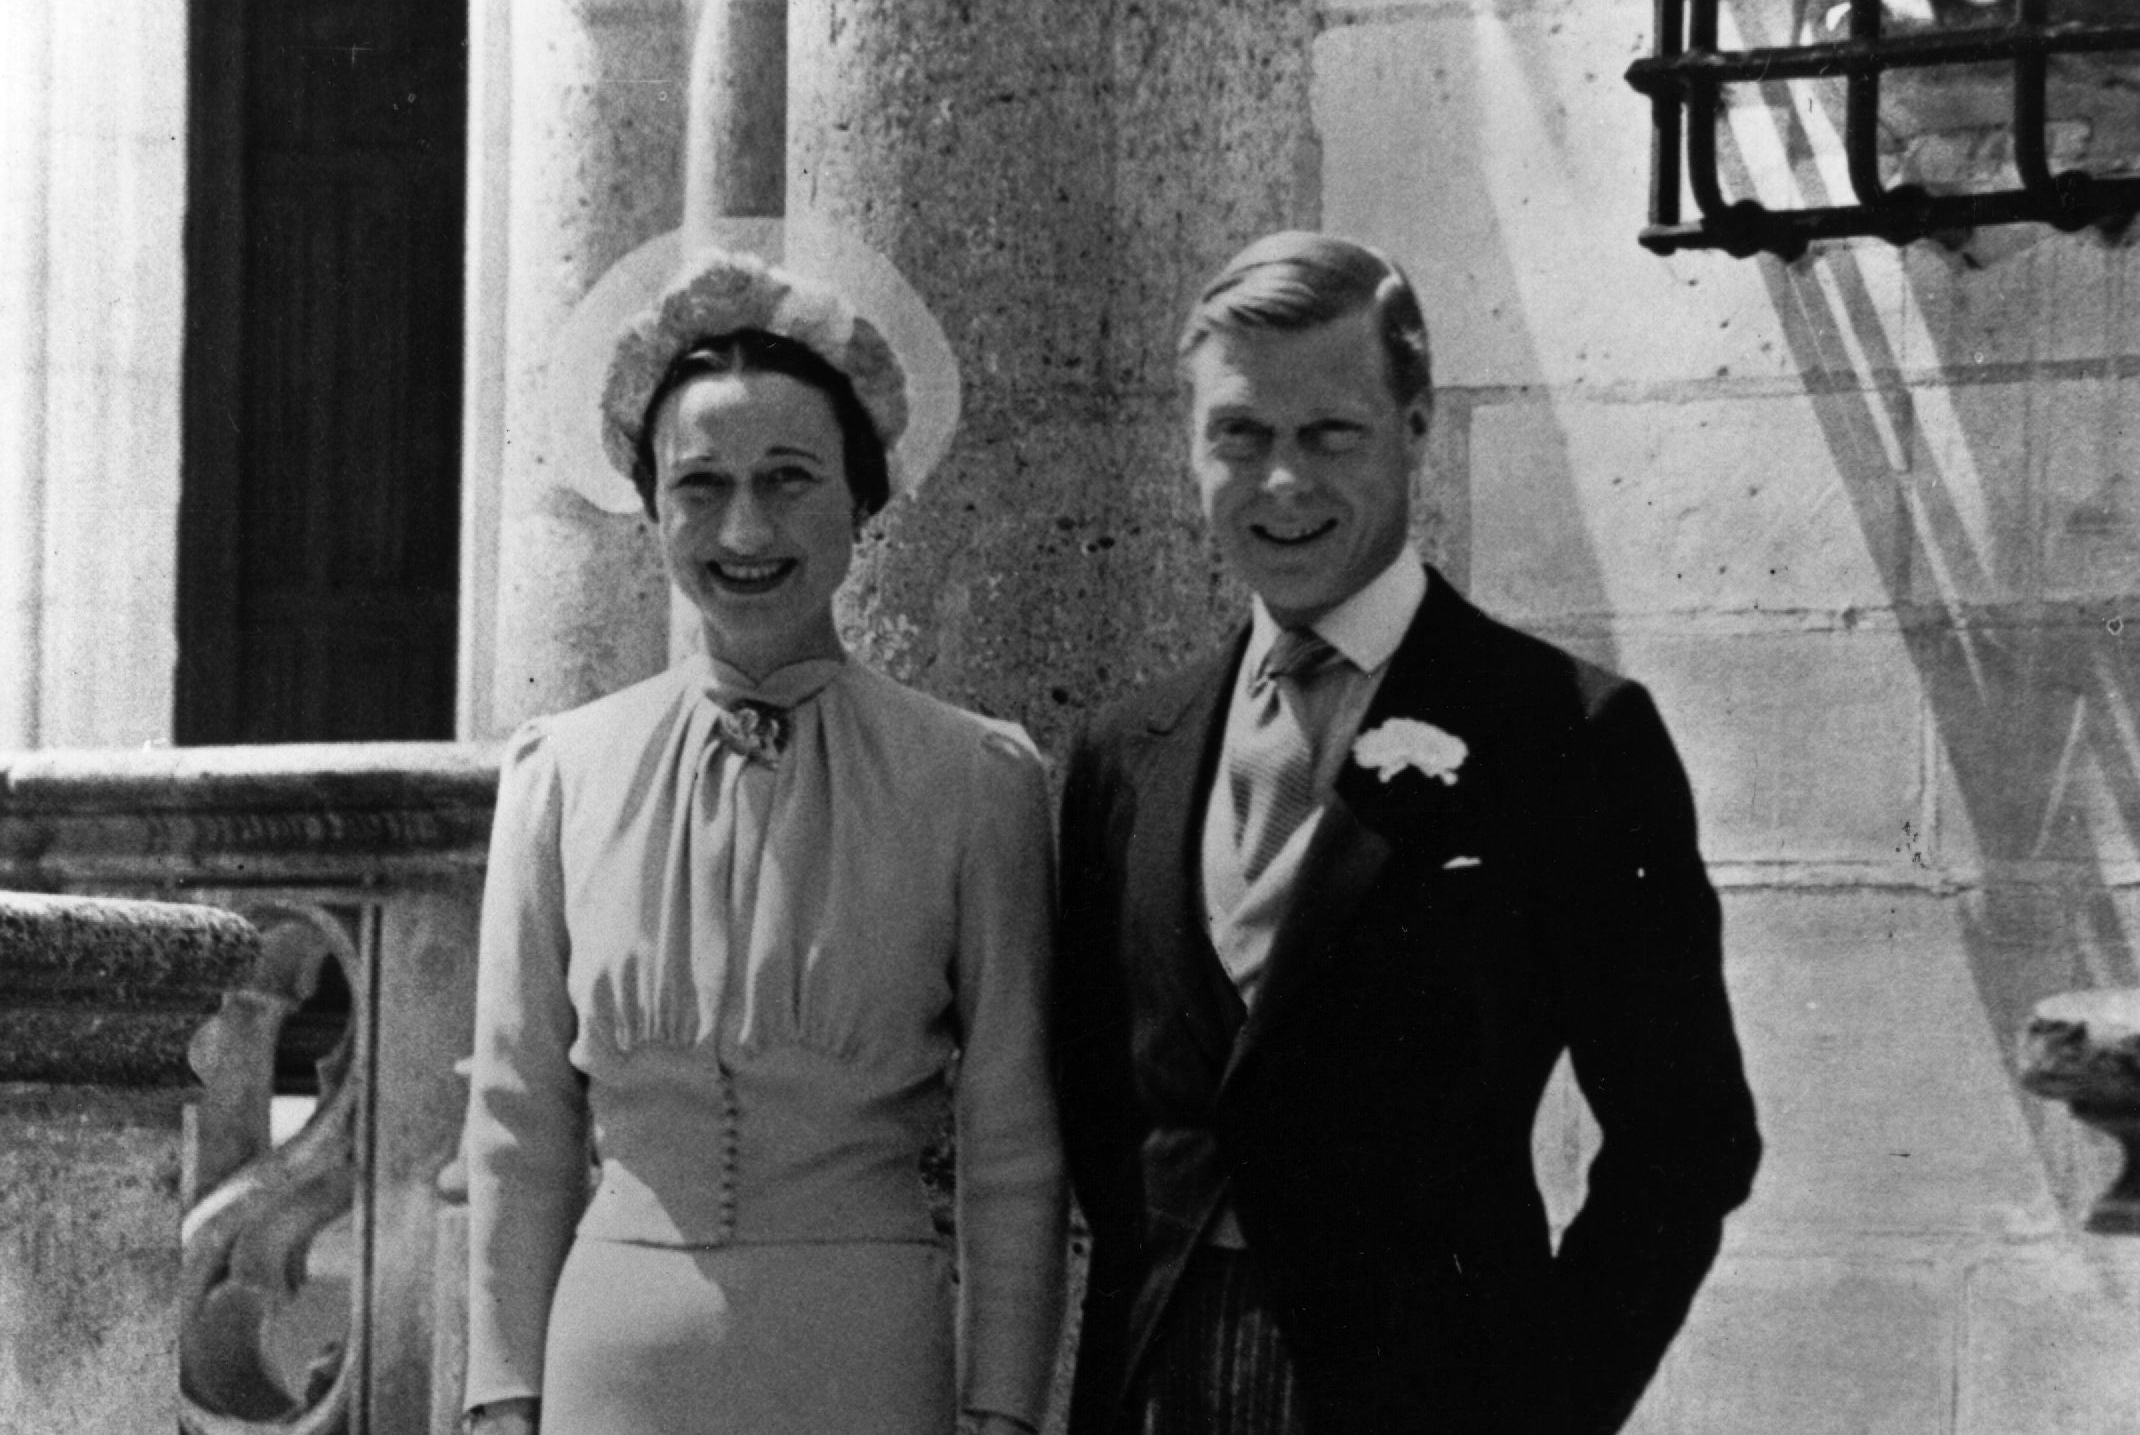 Duke of Windsor and Mrs Wallis Simpson on their wedding day at Chateau de Conde, France.